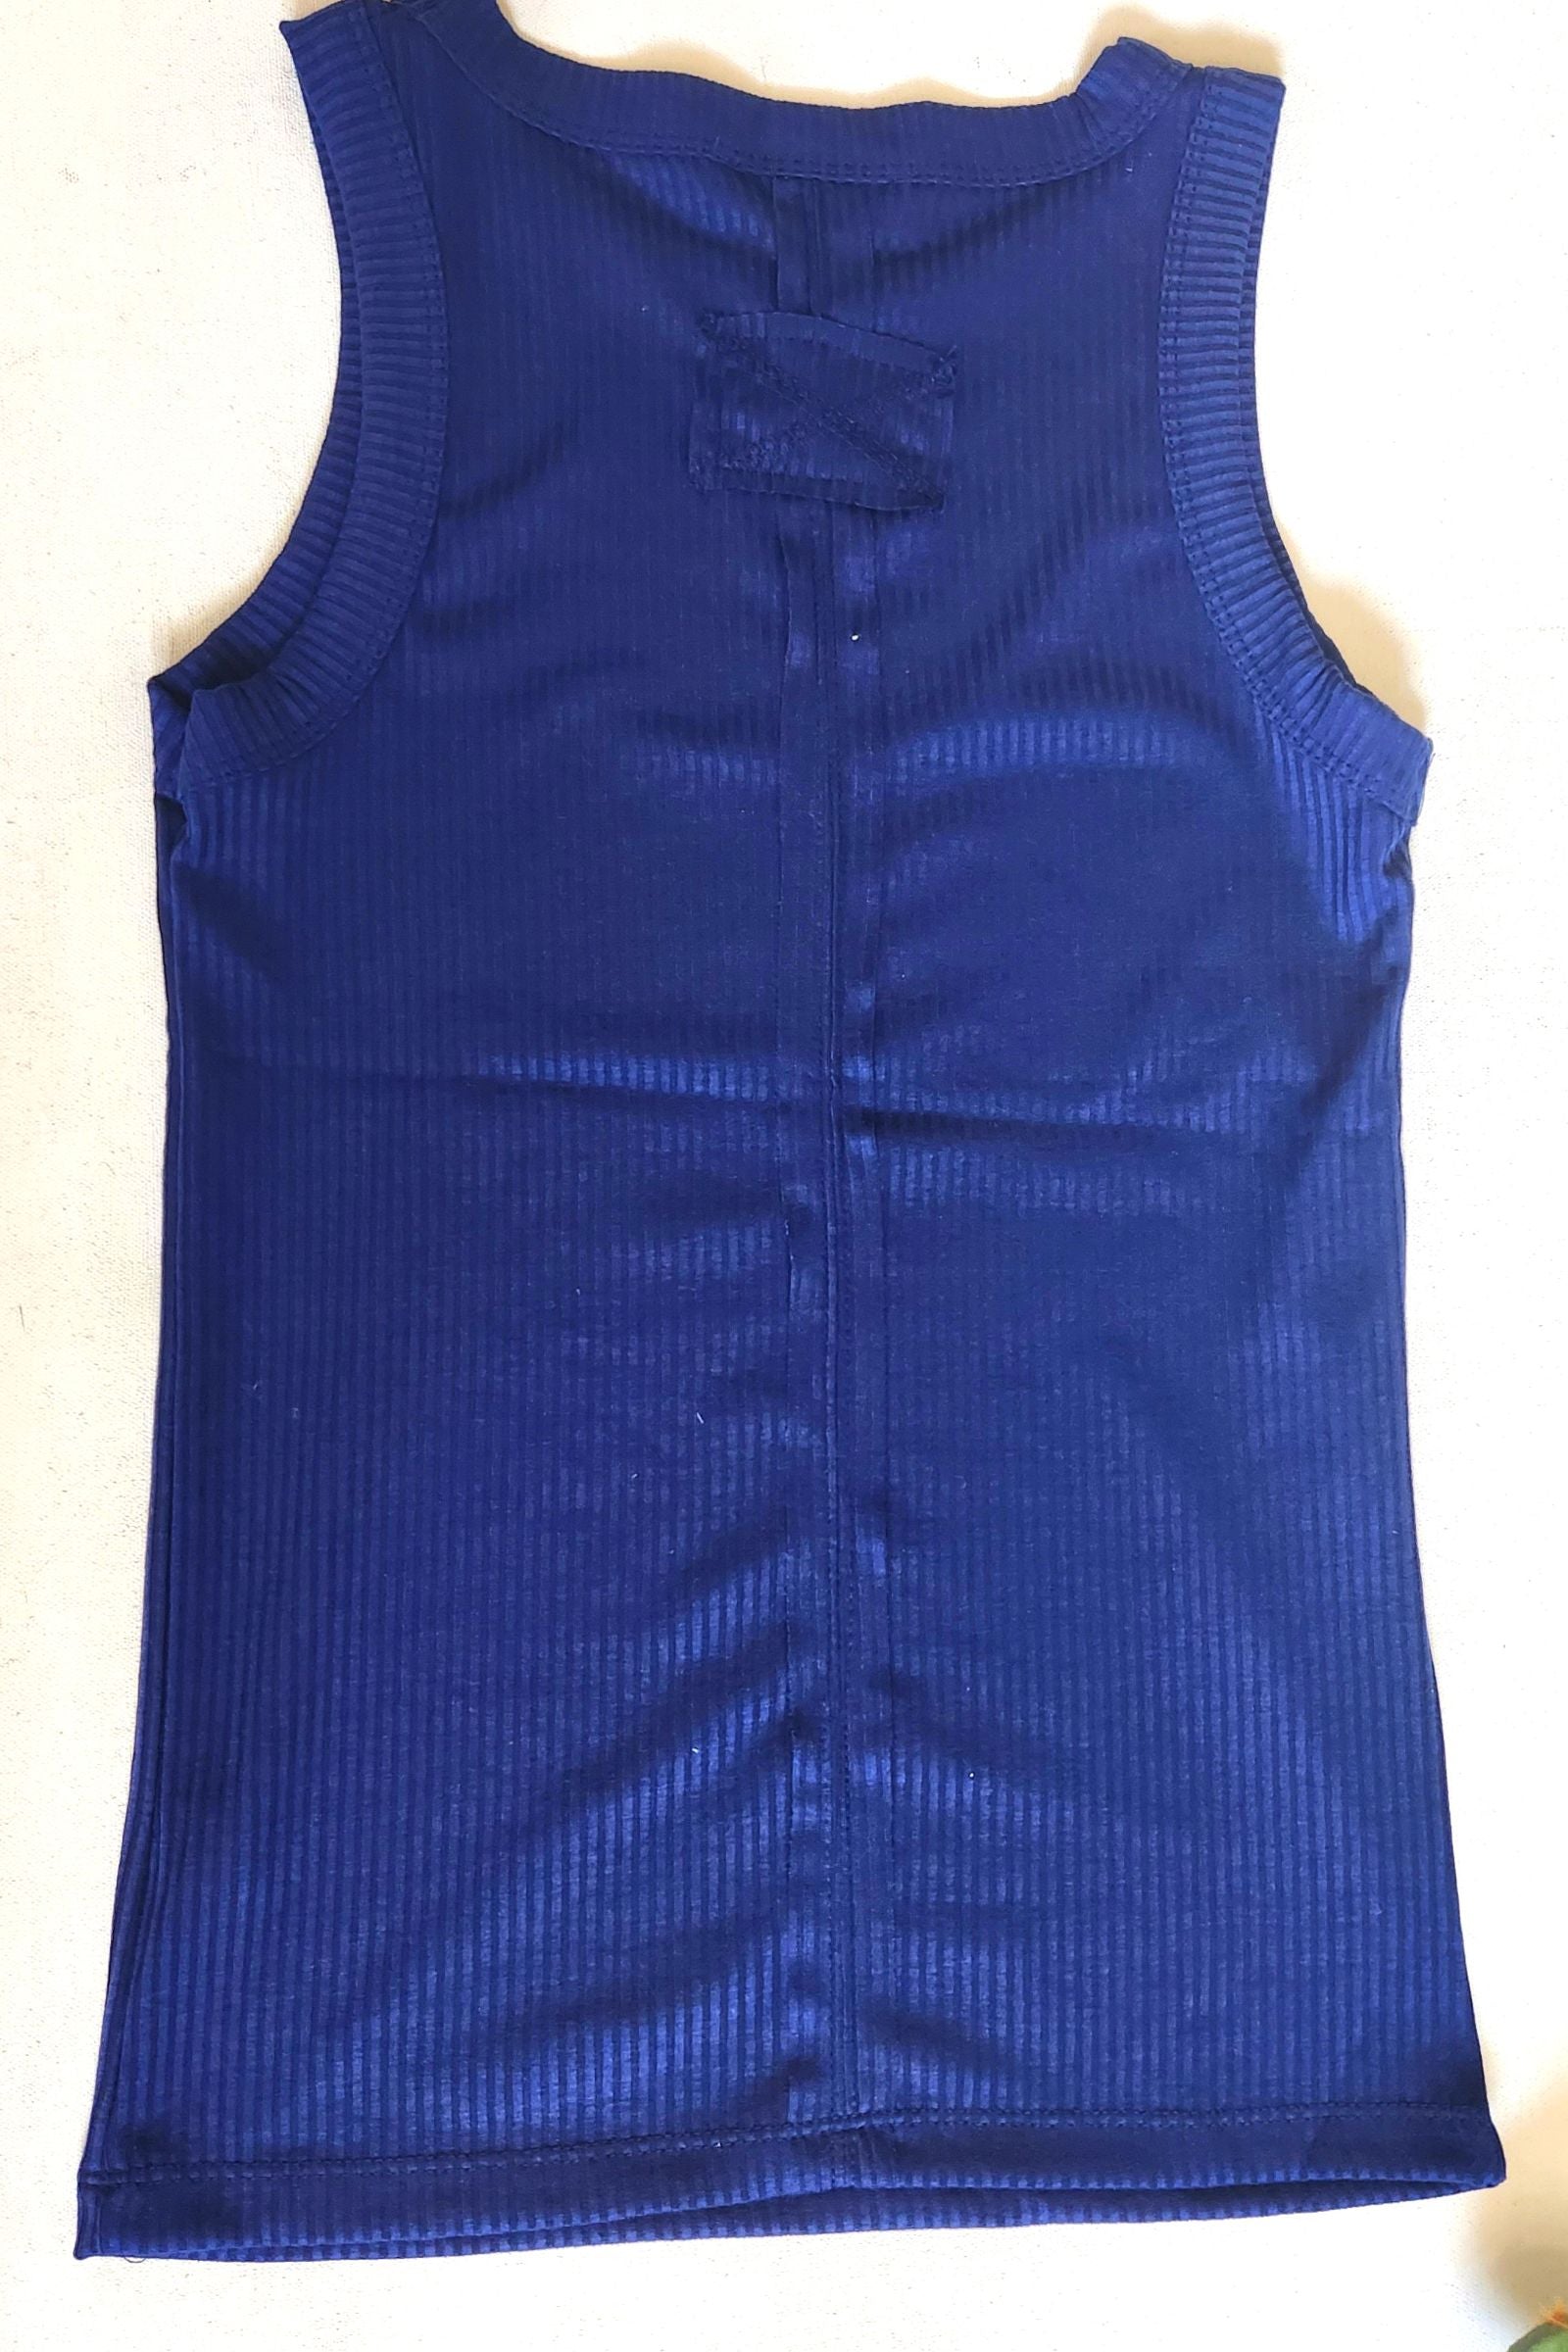 Ribbed Scoop Neck Tank Top - 2 Colors